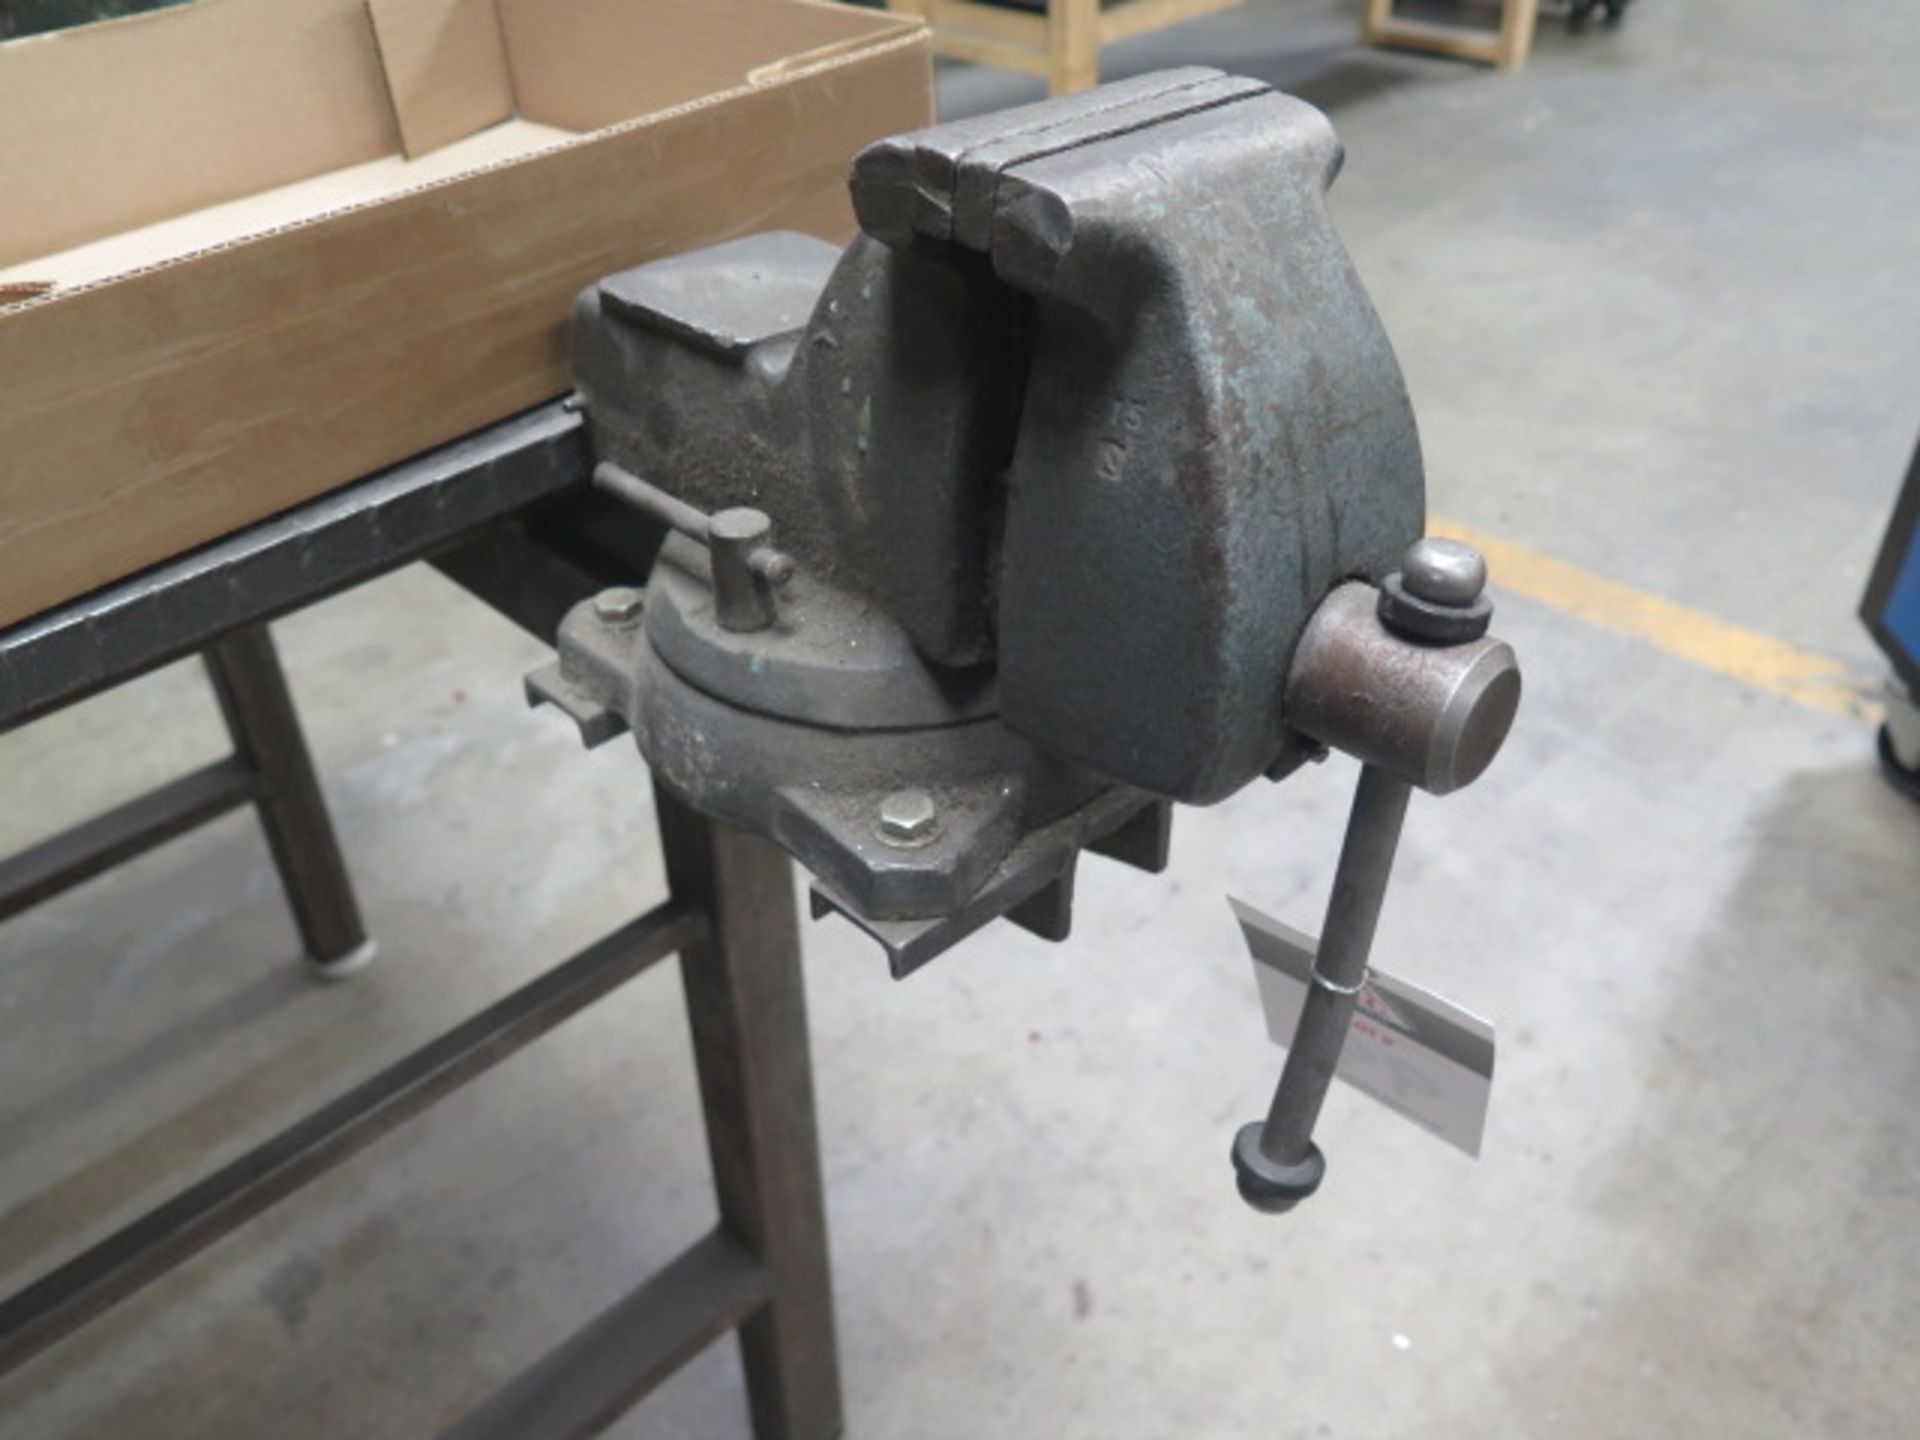 Welding Table w/ Bench Vise (SOLD AS-IS - NO WARRANTY) - Image 3 of 4